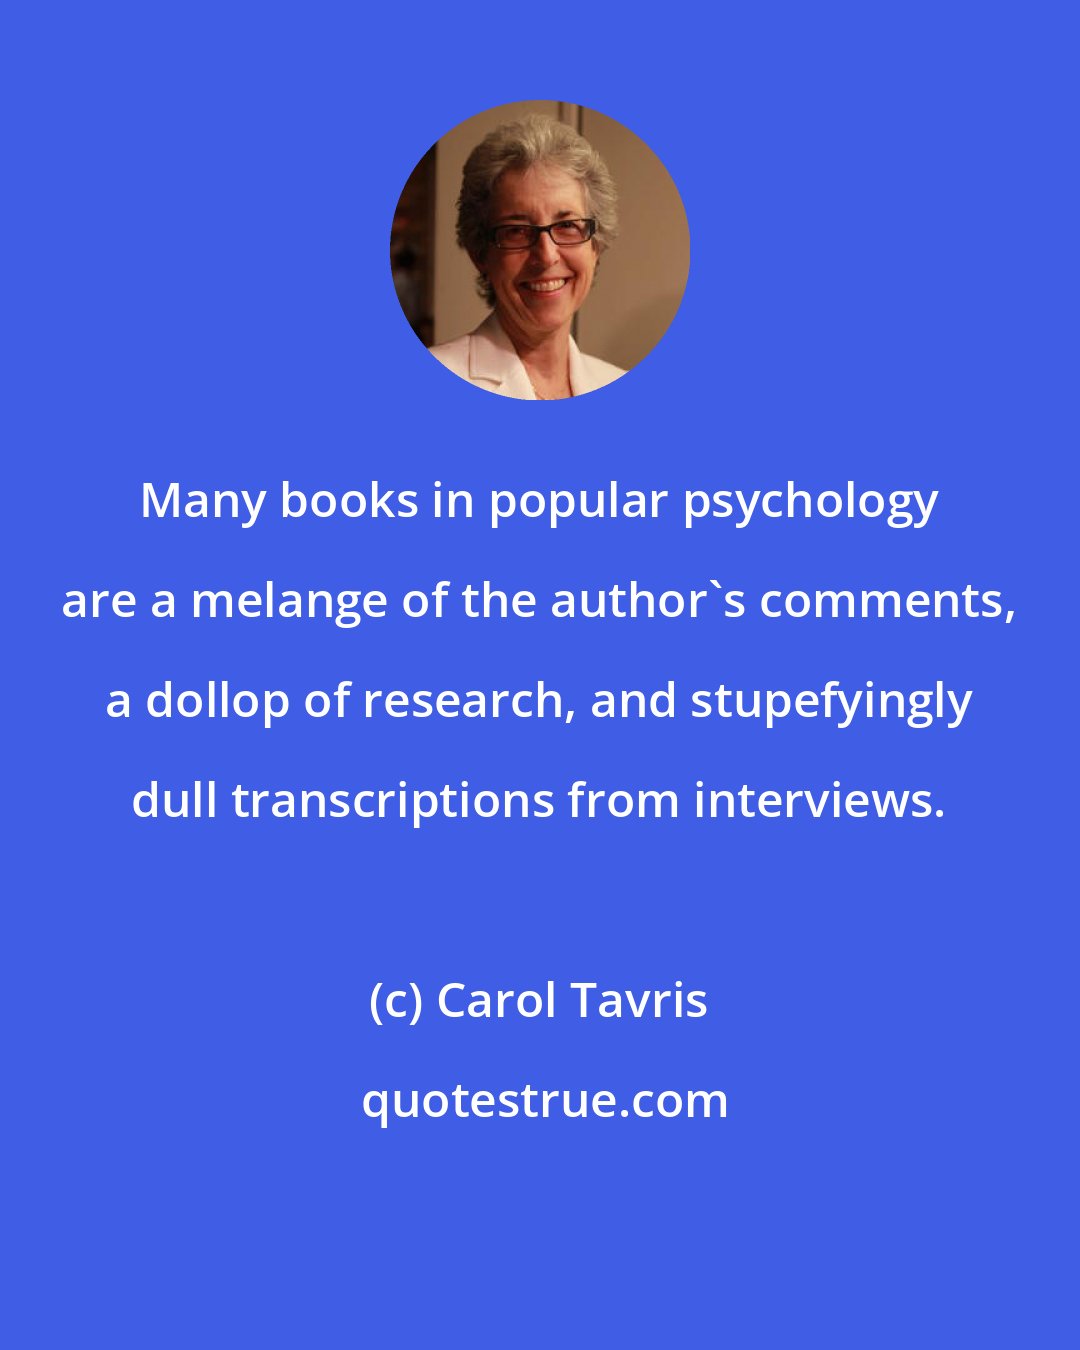 Carol Tavris: Many books in popular psychology are a melange of the author's comments, a dollop of research, and stupefyingly dull transcriptions from interviews.